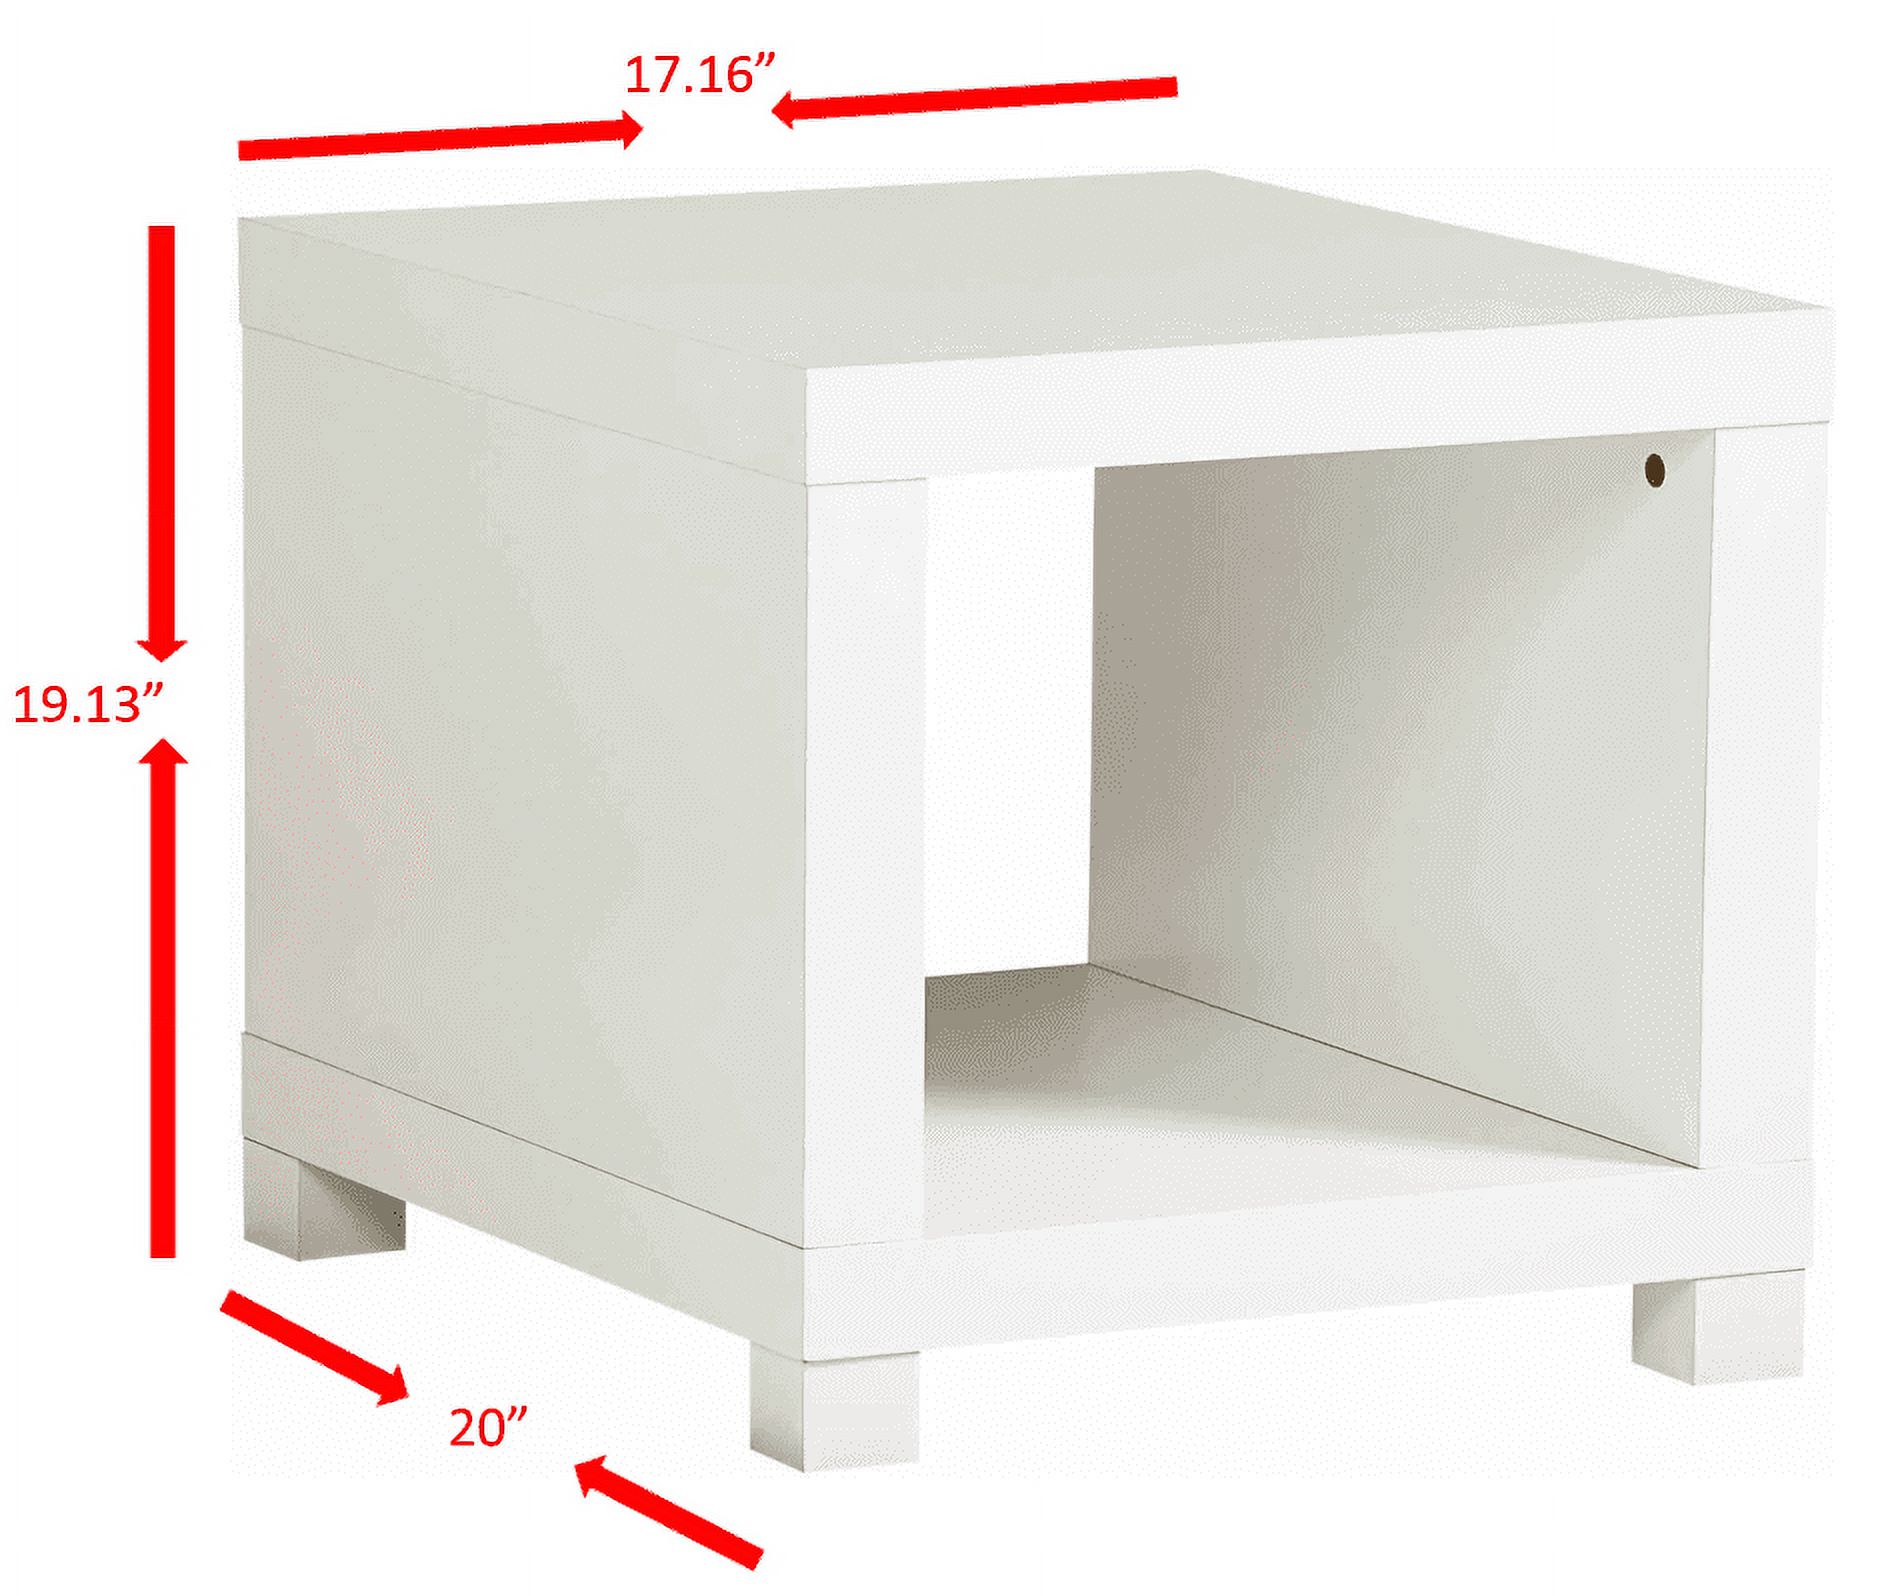 Better Homes & Gardens Accent Table, Espresso - image 5 of 5